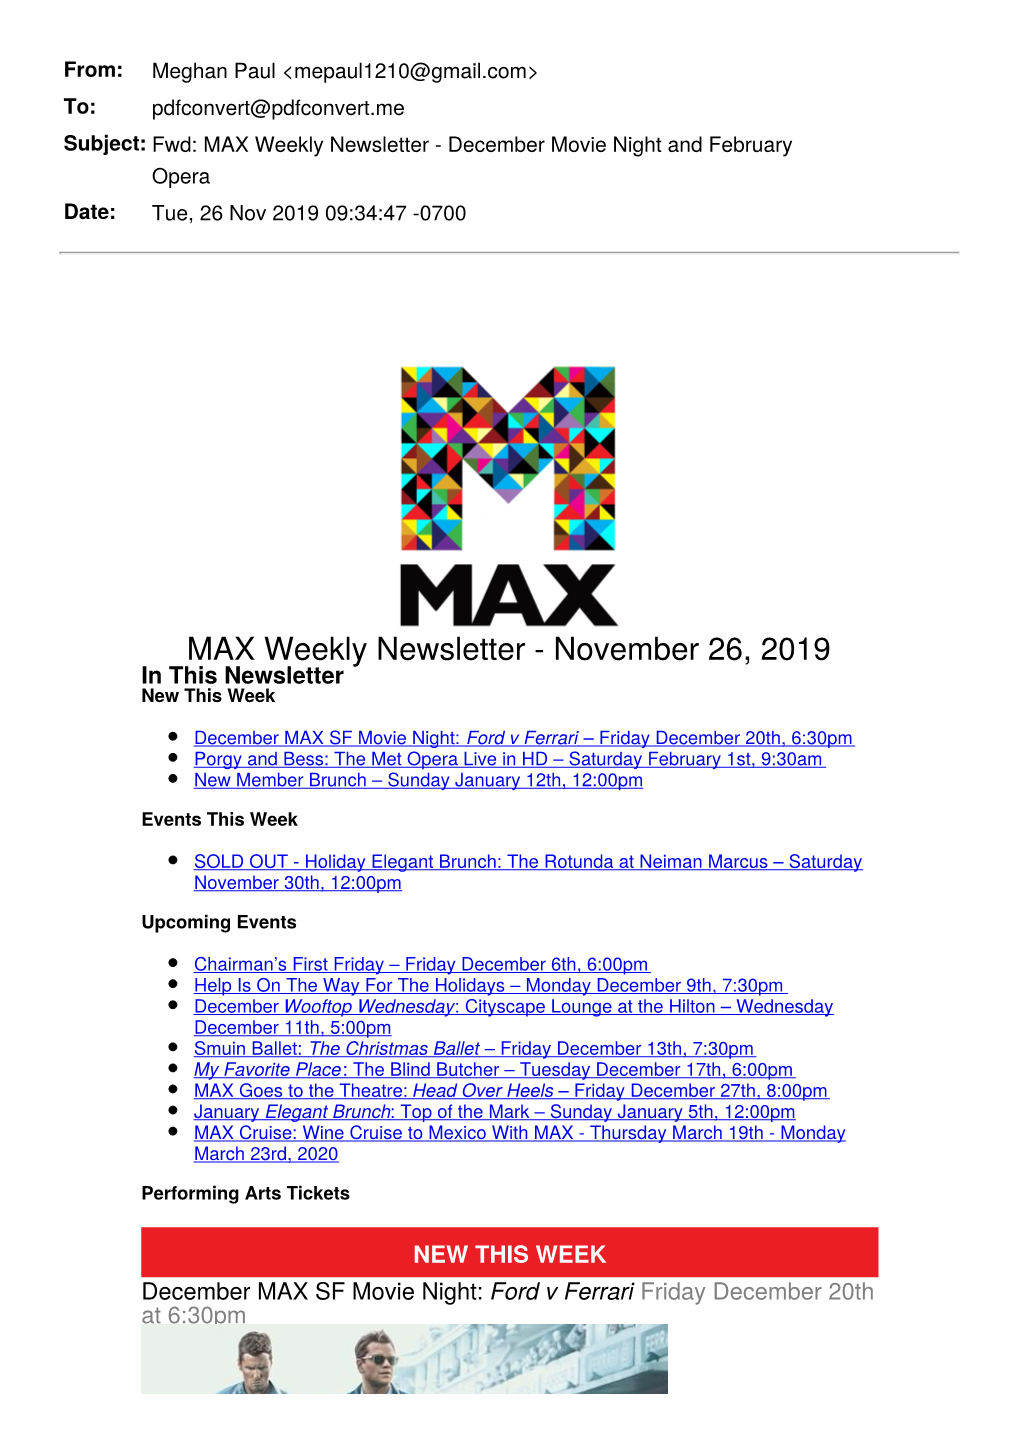 MAX Weekly Newsletter - December Movie Night and February Opera Date: Tue, 26 Nov 2019 09:34:47 -0700